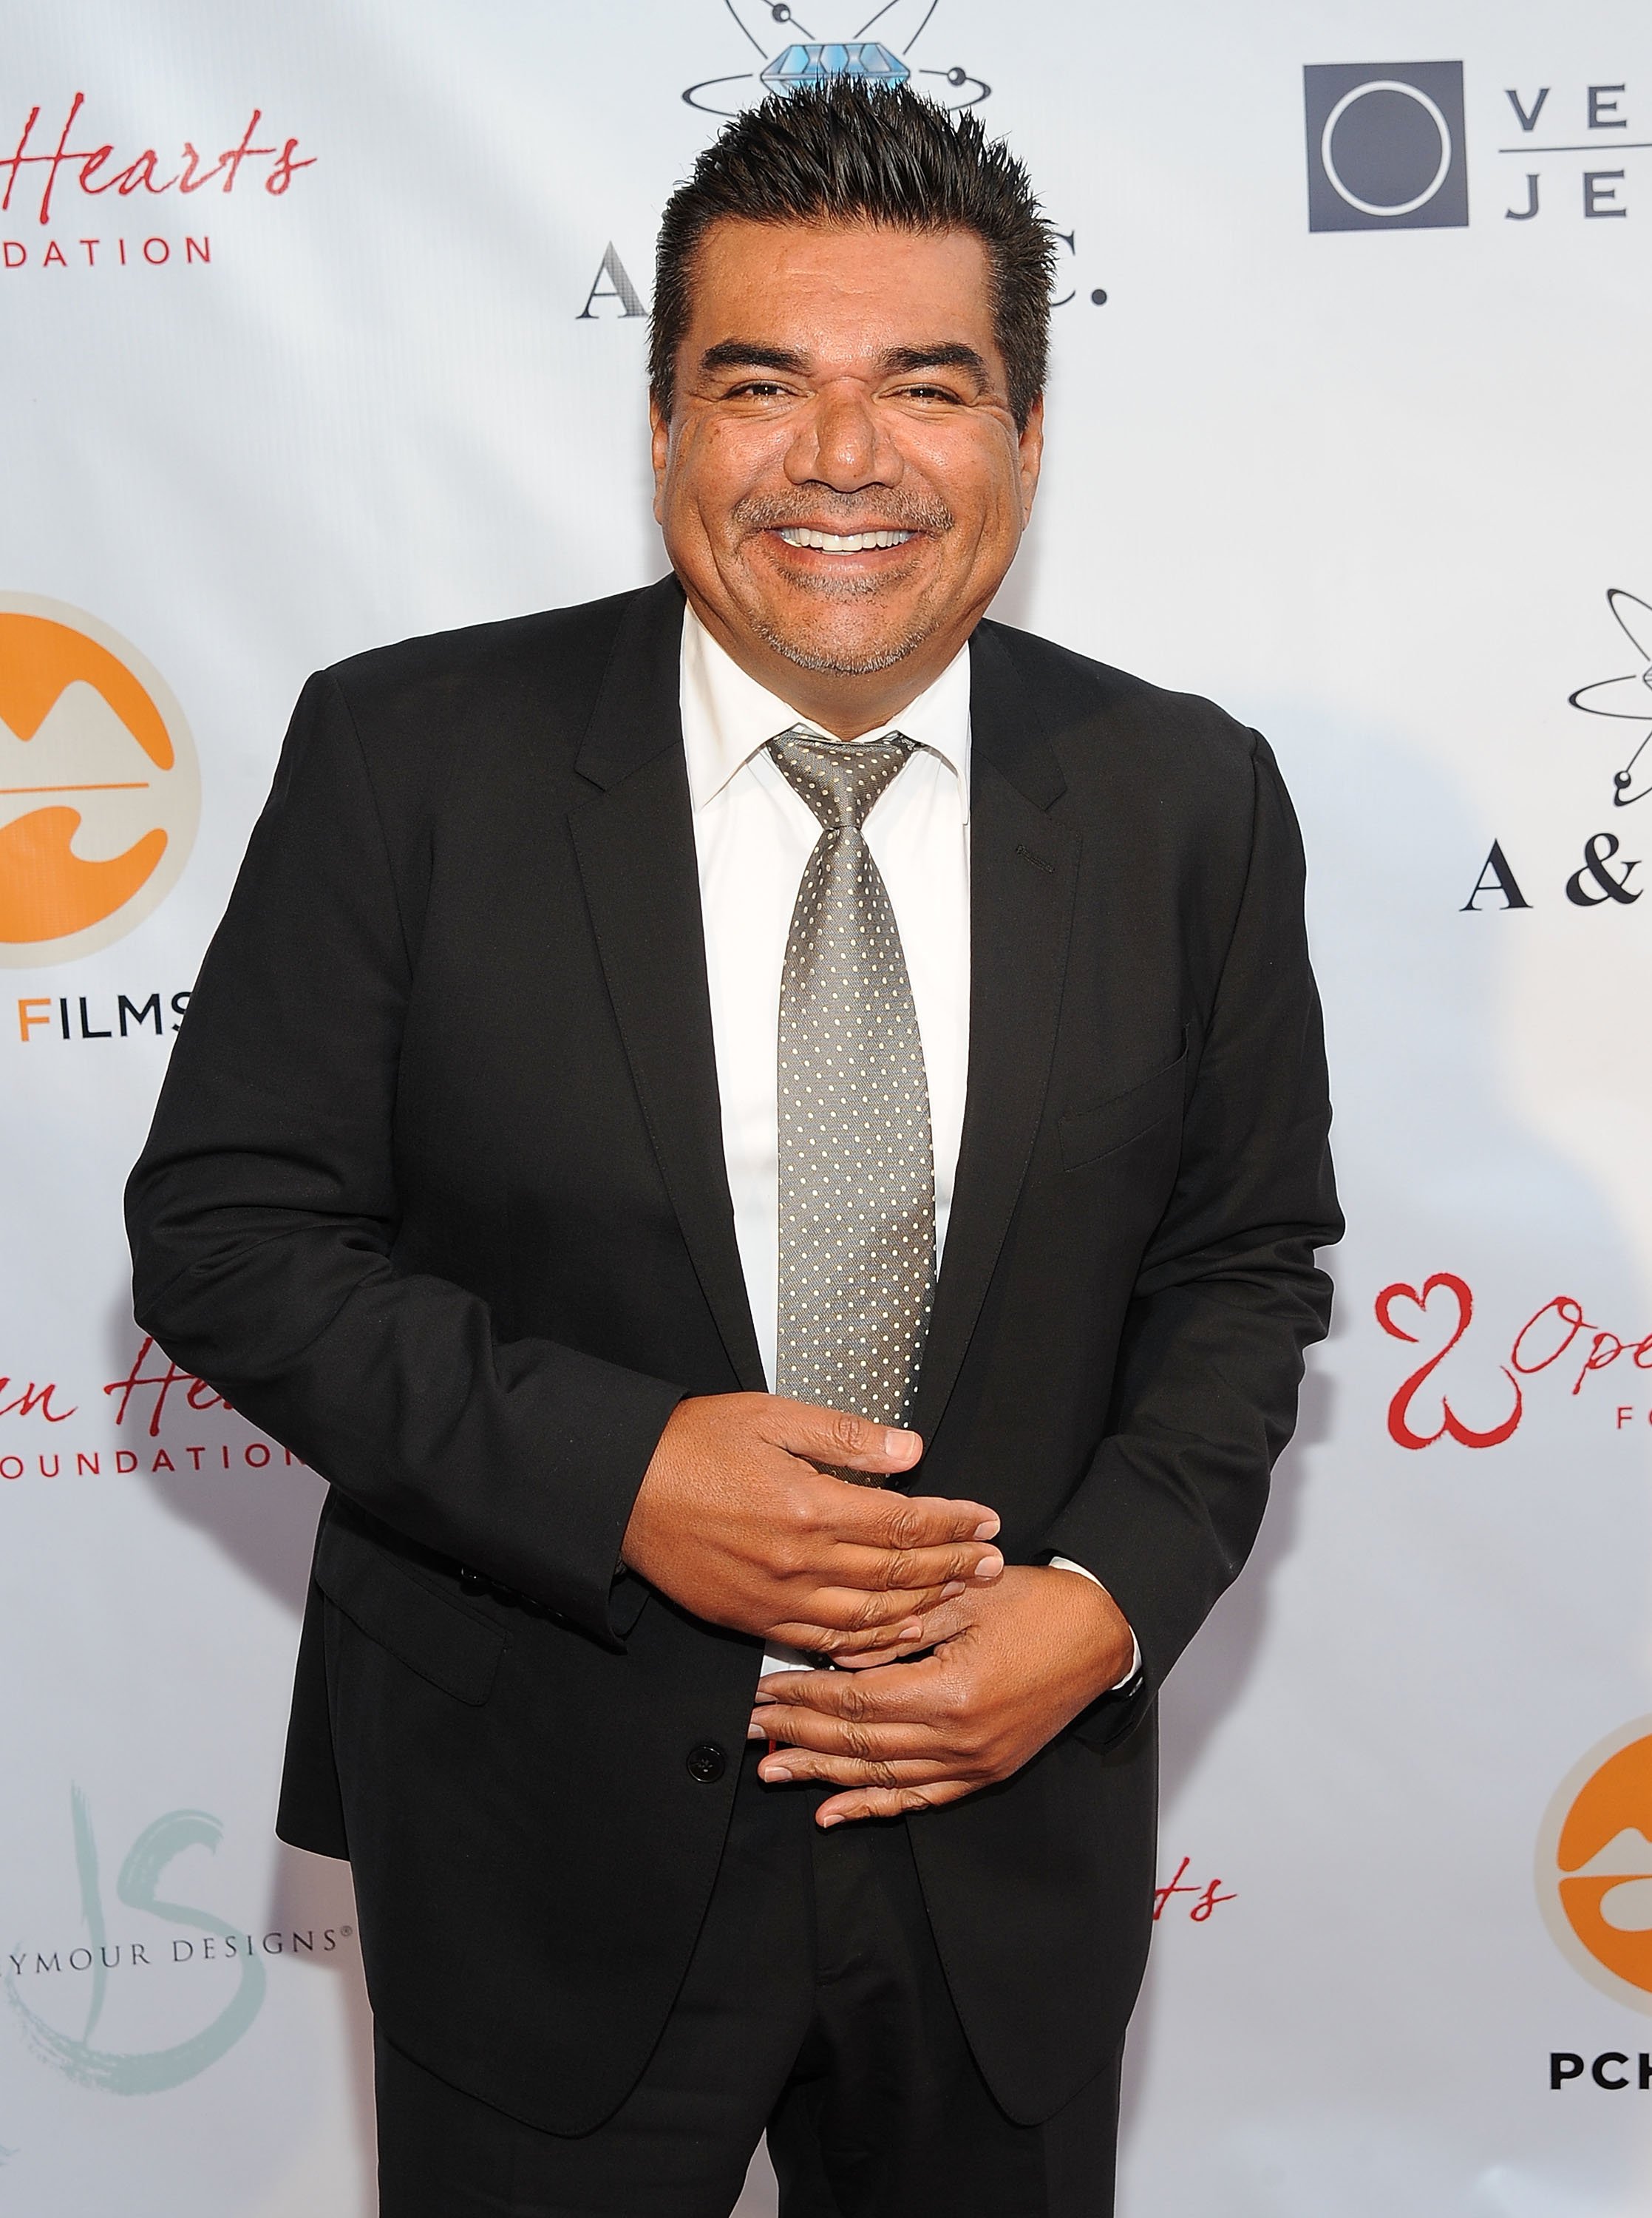 George Lopez at the 5th Annual Open Hearts Foundation Gala on May 9, 2015, in Malibu, California. | Source: Getty Images